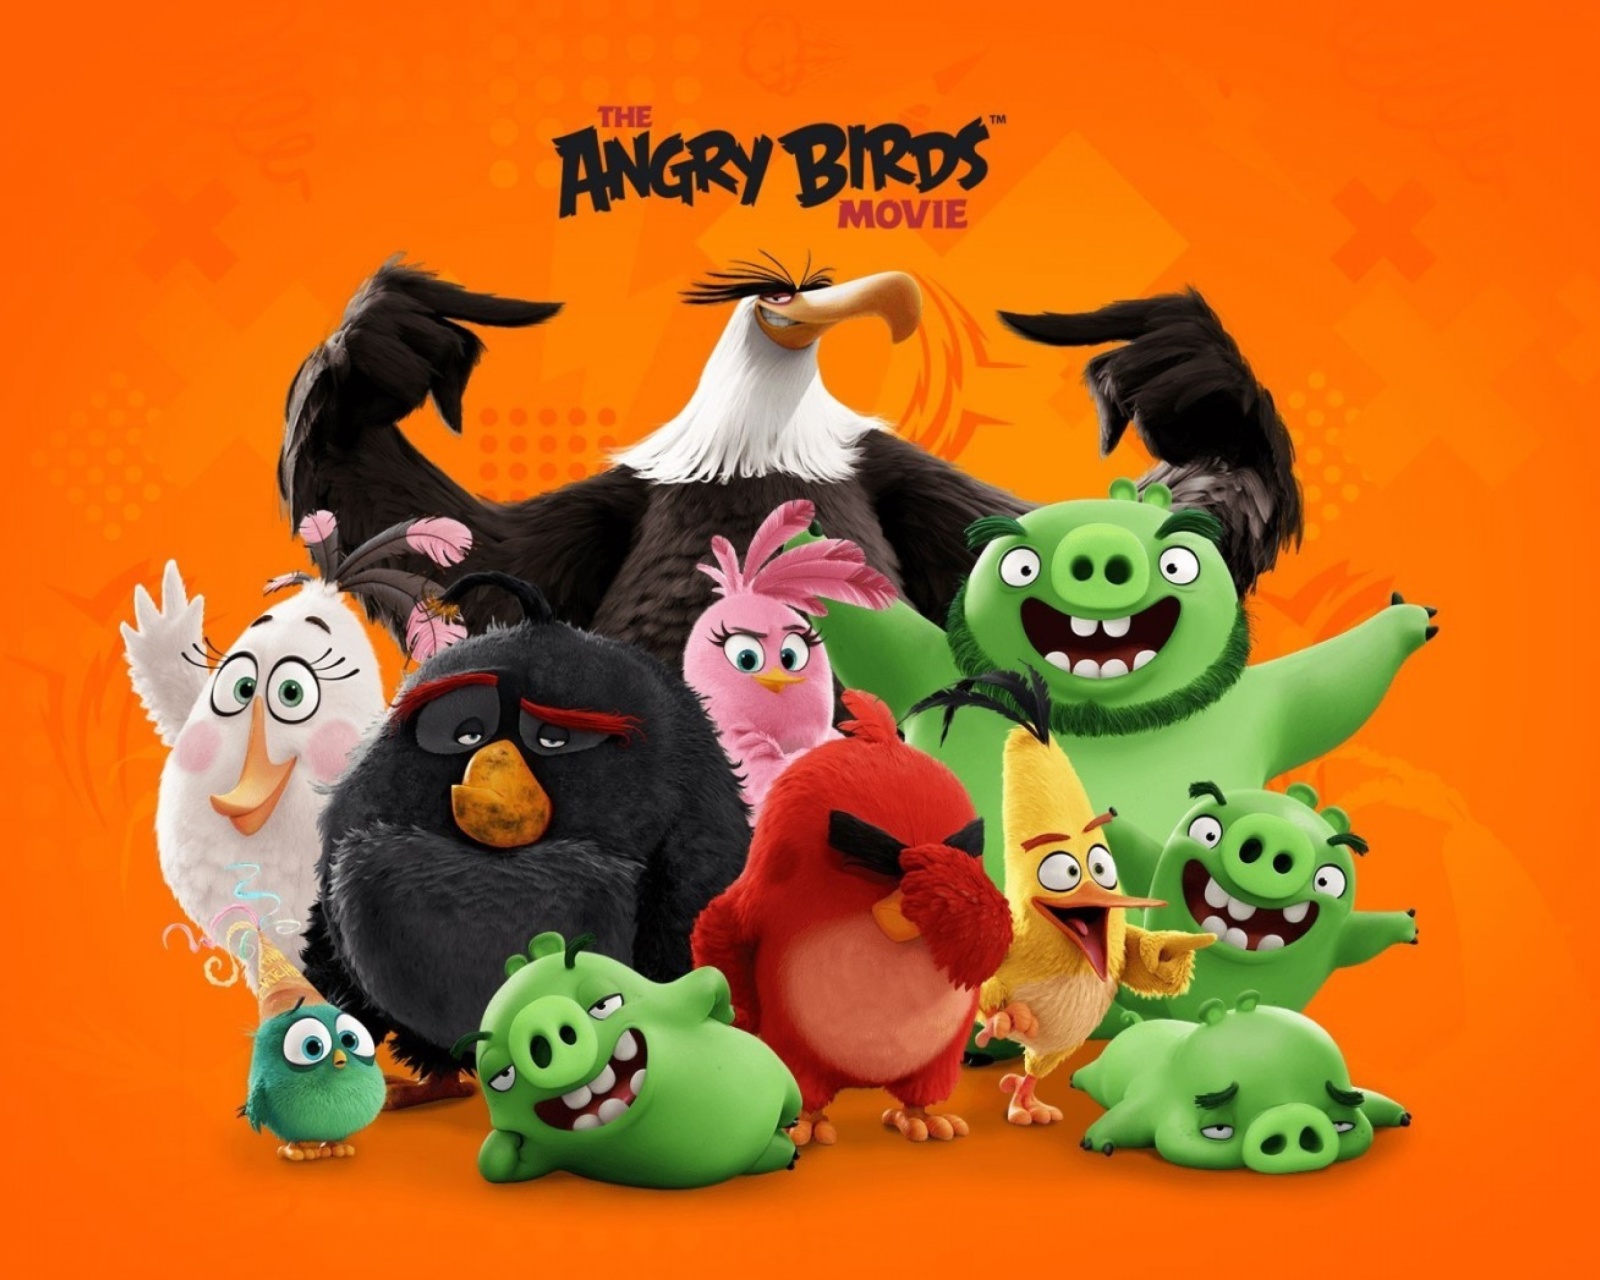 Das Angry Birds the Movie Release by Rovio Wallpaper 1600x1280